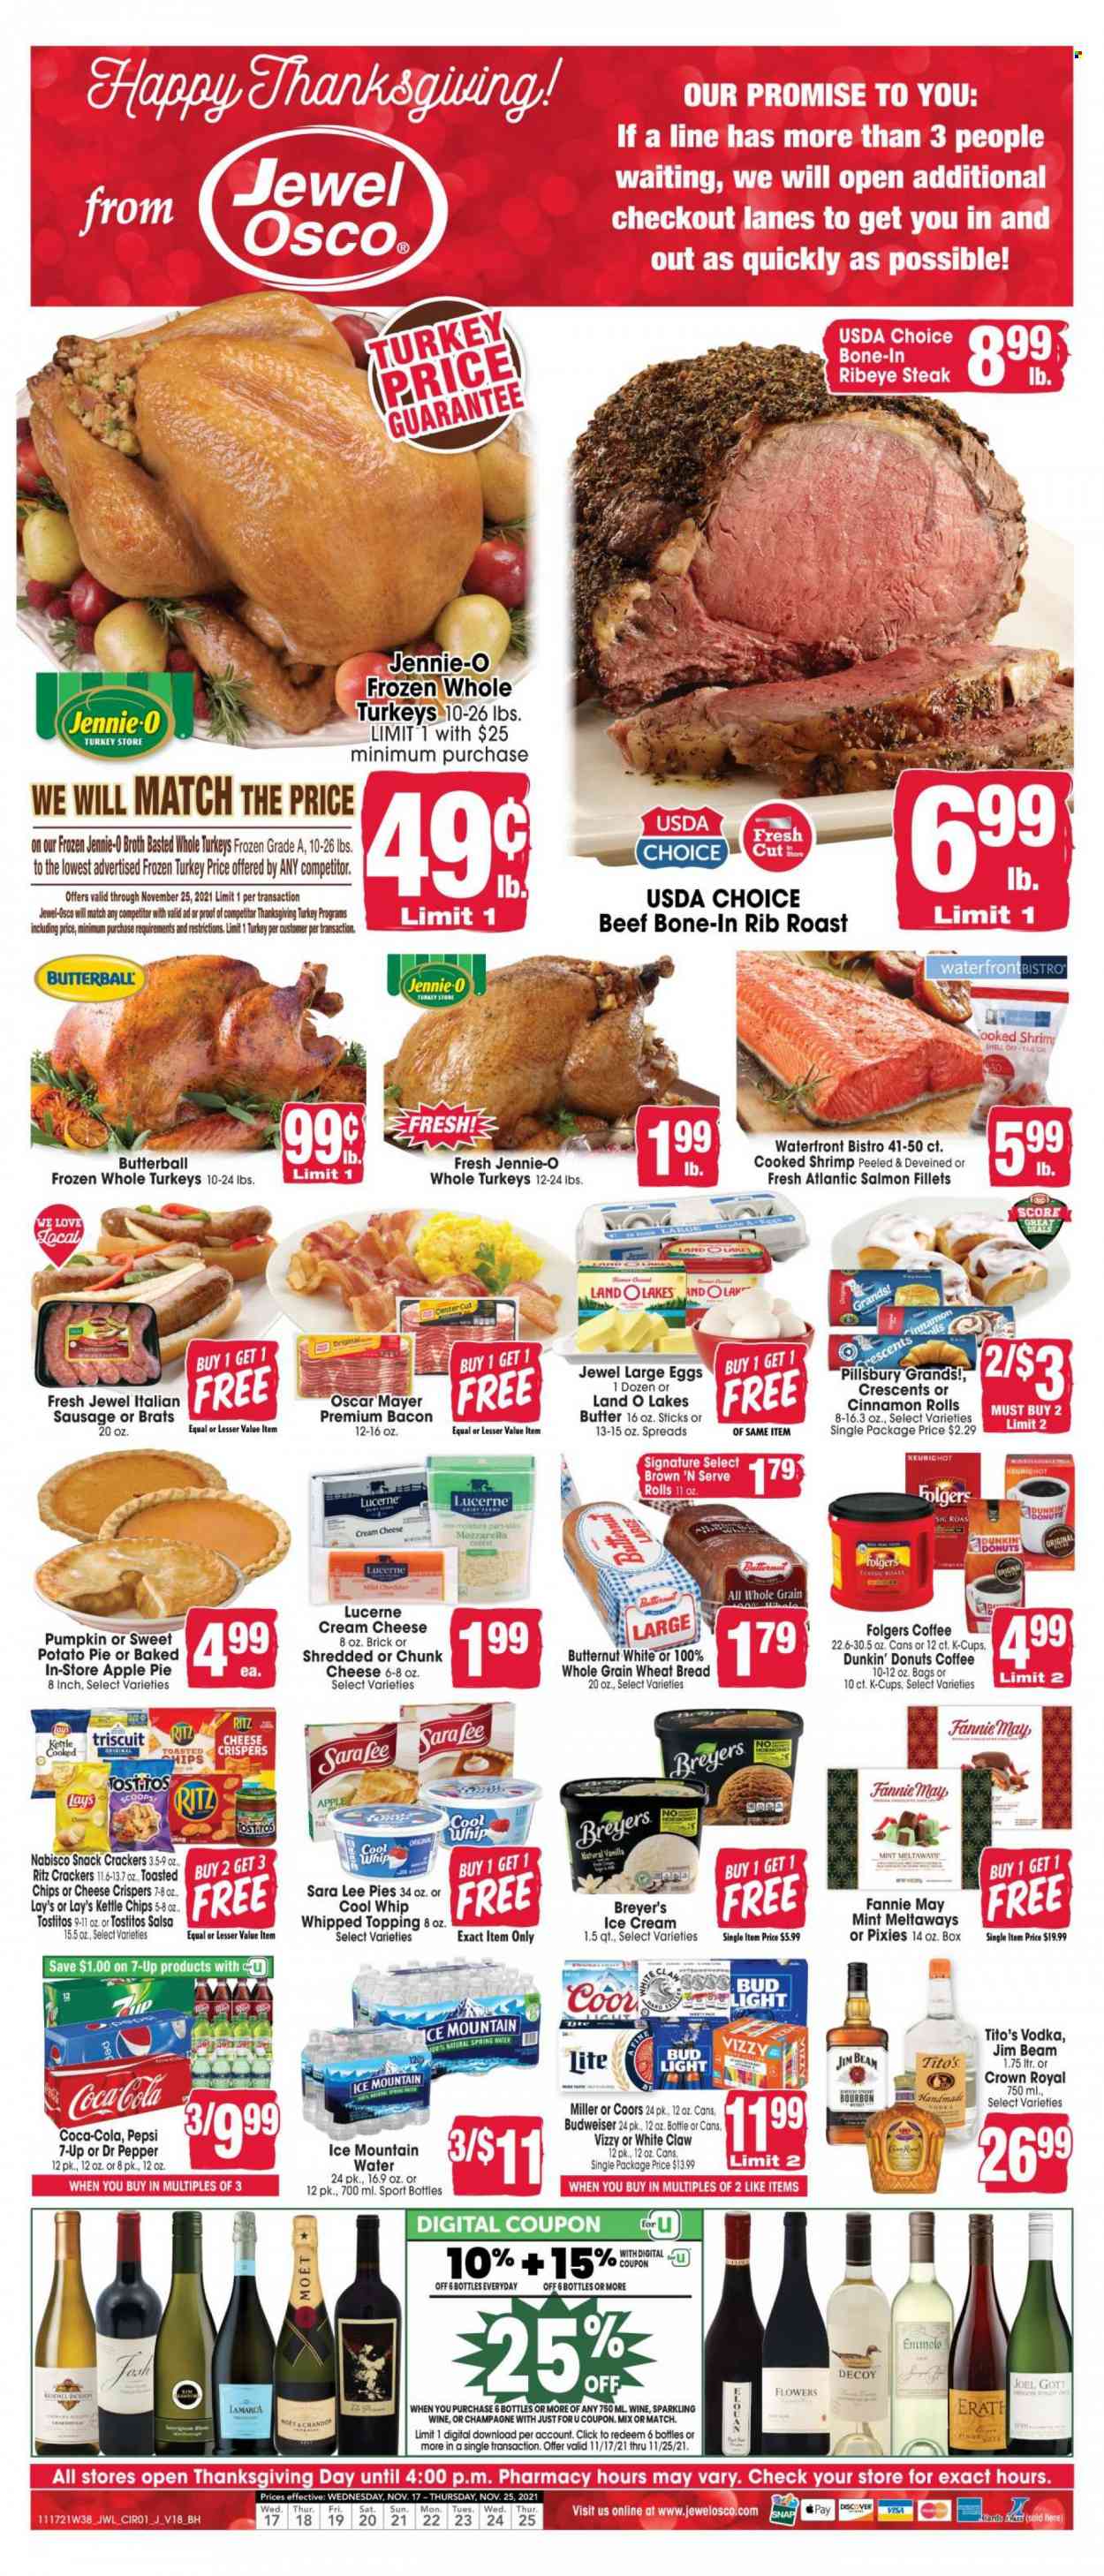 thumbnail - Jewel Osco Flyer - 11/17/2021 - 11/25/2021 - Sales products - wheat bread, pie, Sara Lee, apple pie, cinnamon roll, Dunkin' Donuts, sweet potato, pumpkin, salmon, salmon fillet, shrimps, Pillsbury, bacon, Butterball, Oscar Mayer, sausage, Brown 'N Serve, italian sausage, cream cheese, mozzarella, chunk cheese, large eggs, Cool Whip, ice cream, snack, crackers, RITZ, Lay’s, Tostitos, topping, broth, salsa, Coca-Cola, Pepsi, Dr. Pepper, 7UP, spring water, Ice Mountain, coffee, Folgers, coffee capsules, K-Cups, sparkling wine, champagne, wine, Moët & Chandon, vodka, Jim Beam, White Claw, beer, Bud Light, Miller, whole turkey, beef meat, beef steak, steak, bone-in ribeye, ribeye steak, beef bone, Budweiser, butternut squash, Coors. Page 1.